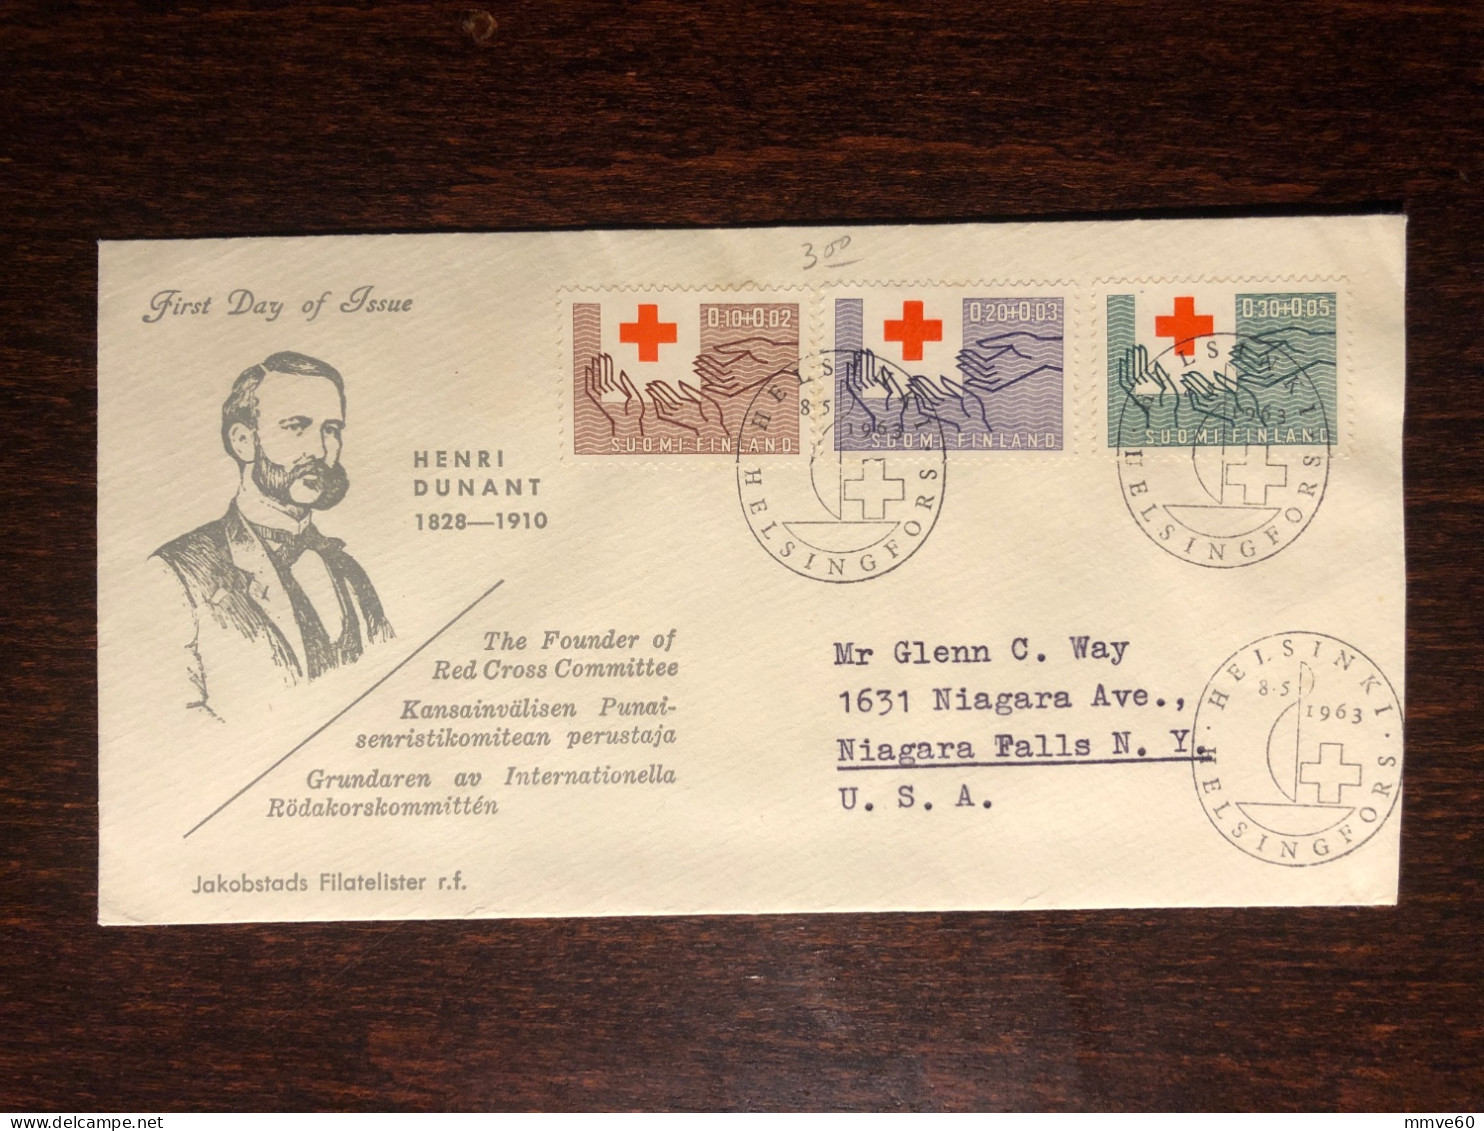 FINLAND FDC COVER 1963 YEAR RED CROSS HEALTH MEDICINE - Covers & Documents